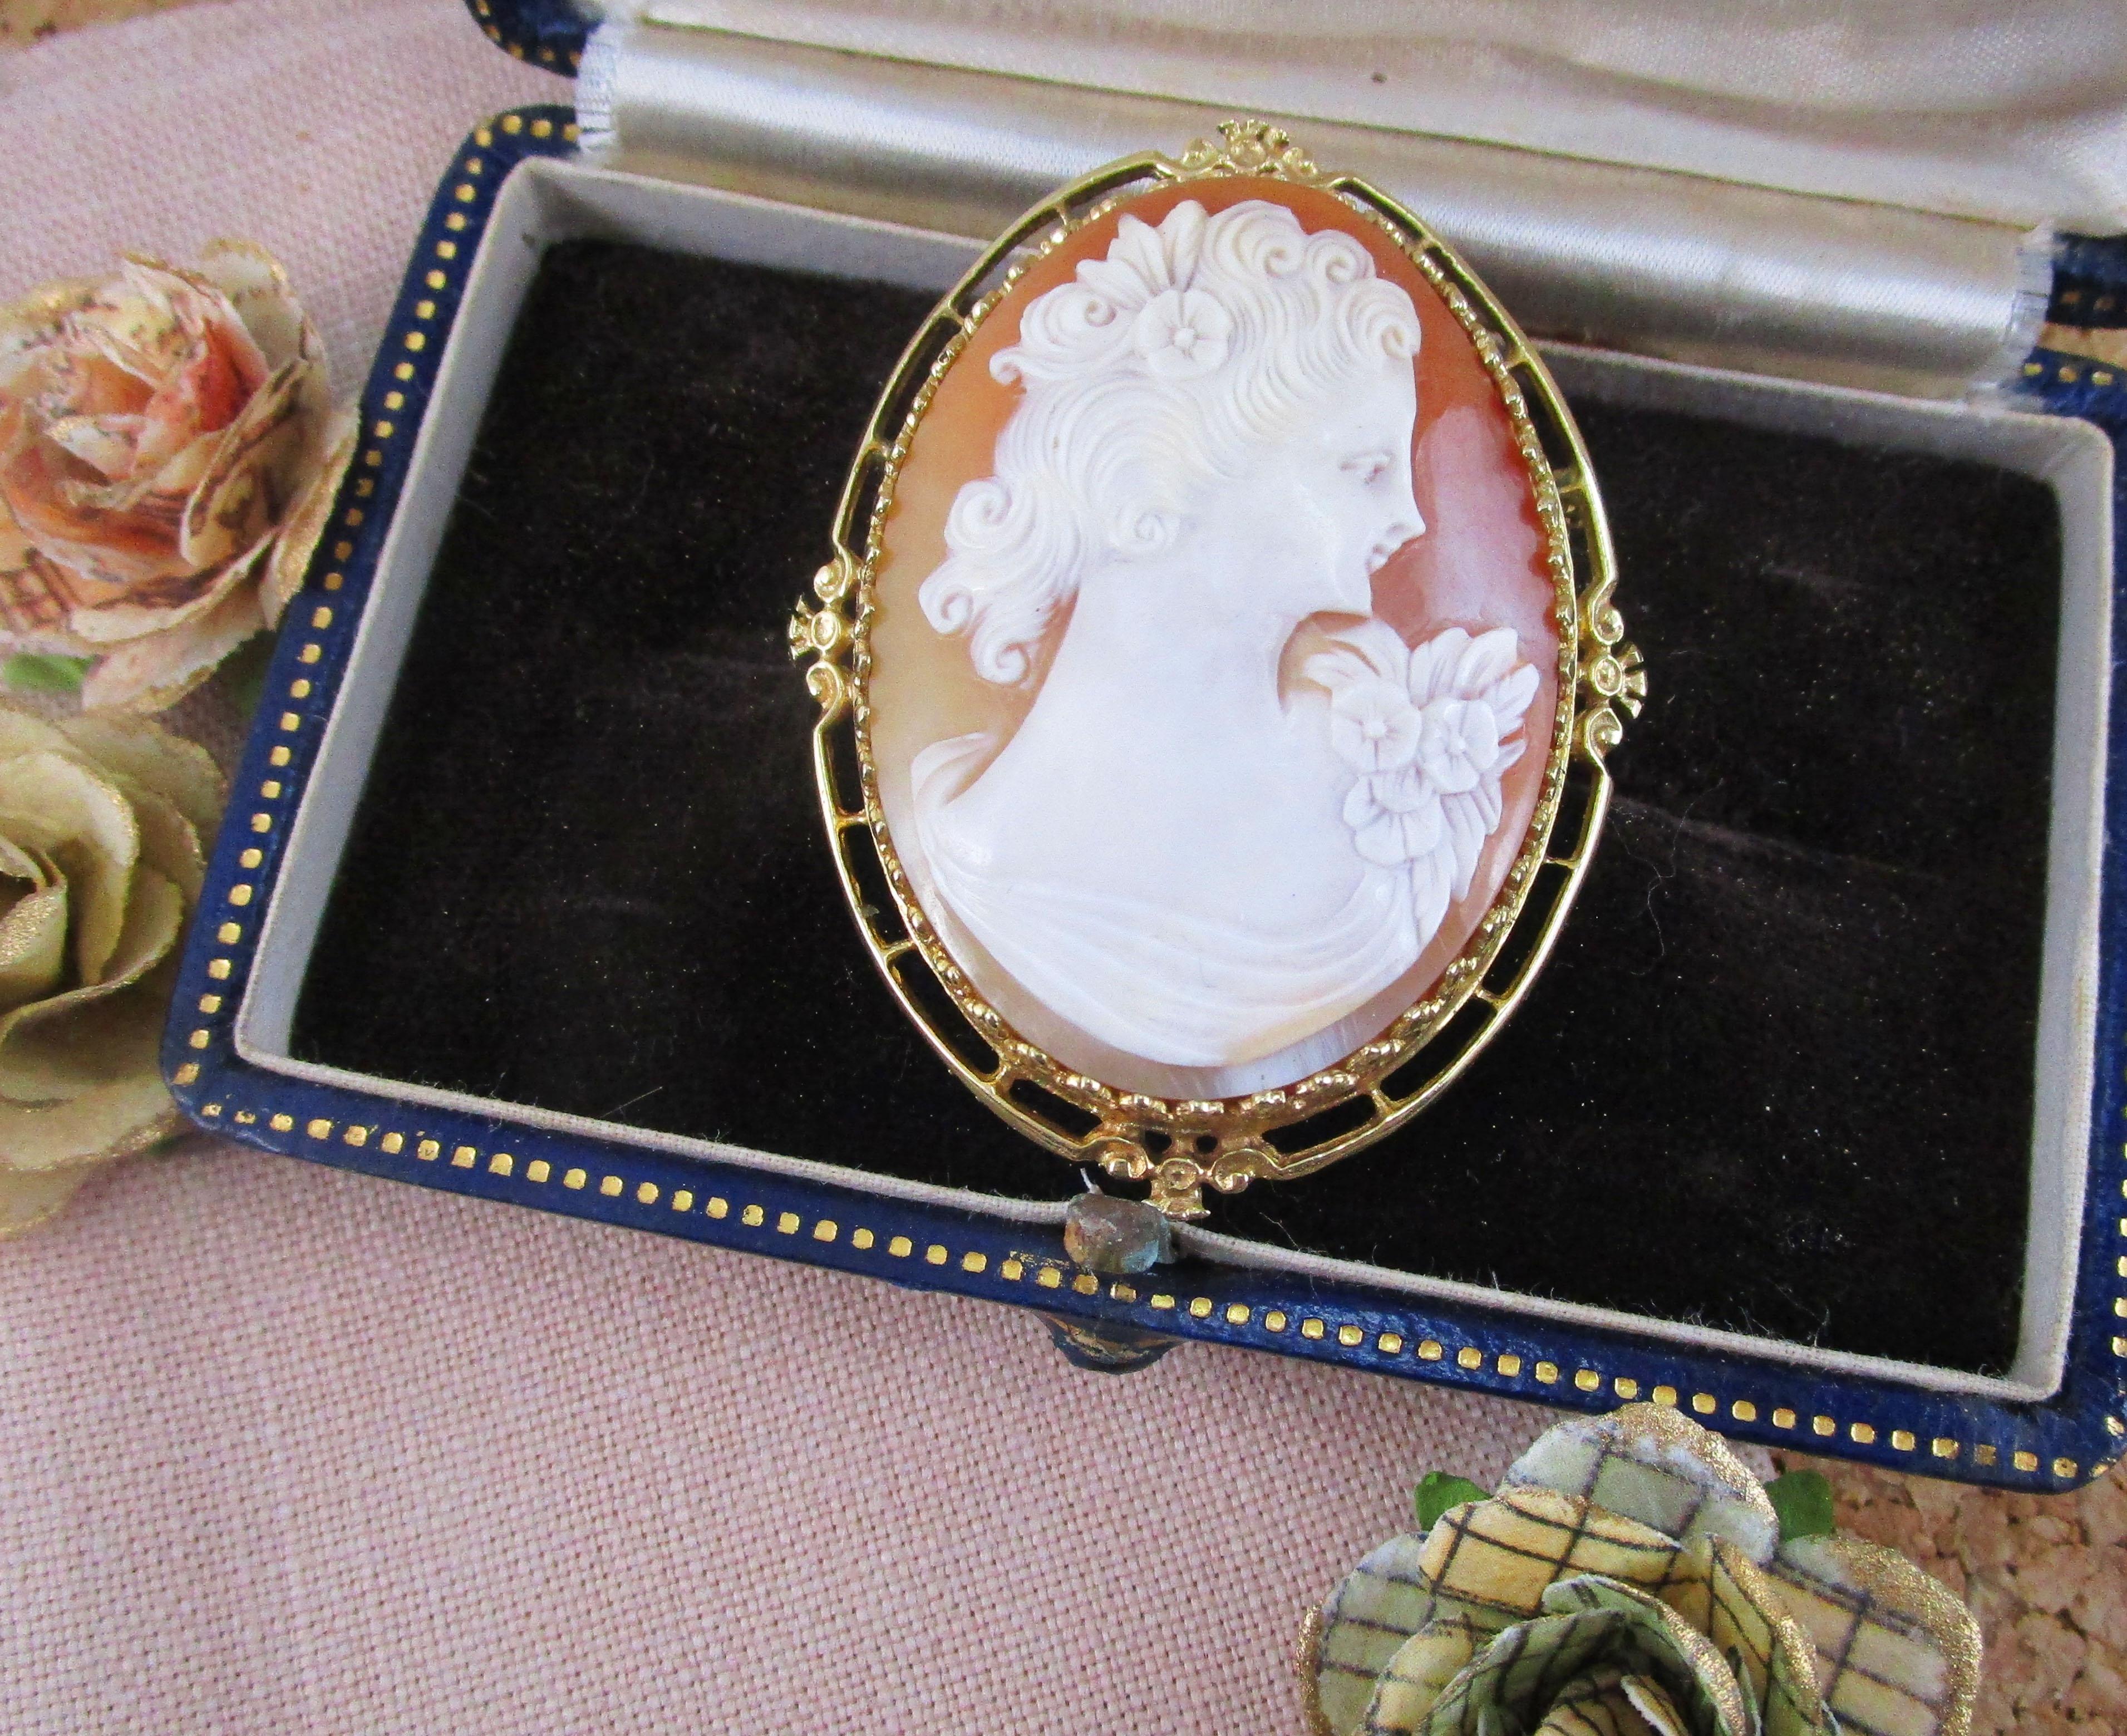 This is a beautiful hand-carved shell cameo from the mid-twentieth century in a delicate 14k yellow gold frame. The cameo itself is delicately carved to depict an elegant woman with fine details in her curling hair and flower adornments meticulously